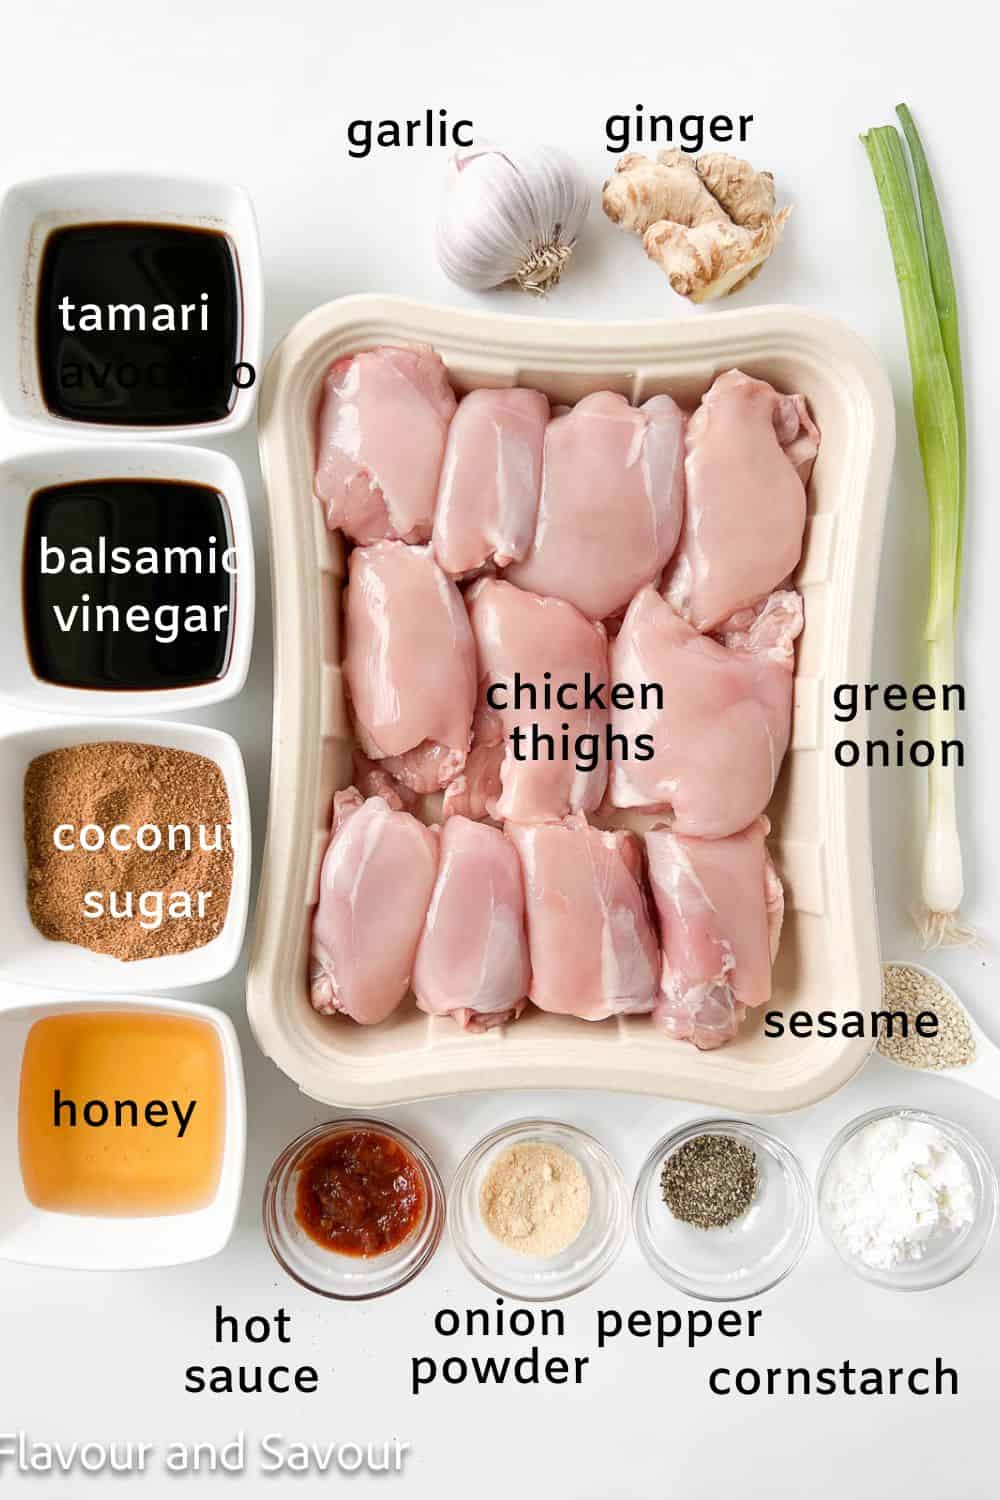 Labelled ingredients for slow cooker sticky chicken thighs.